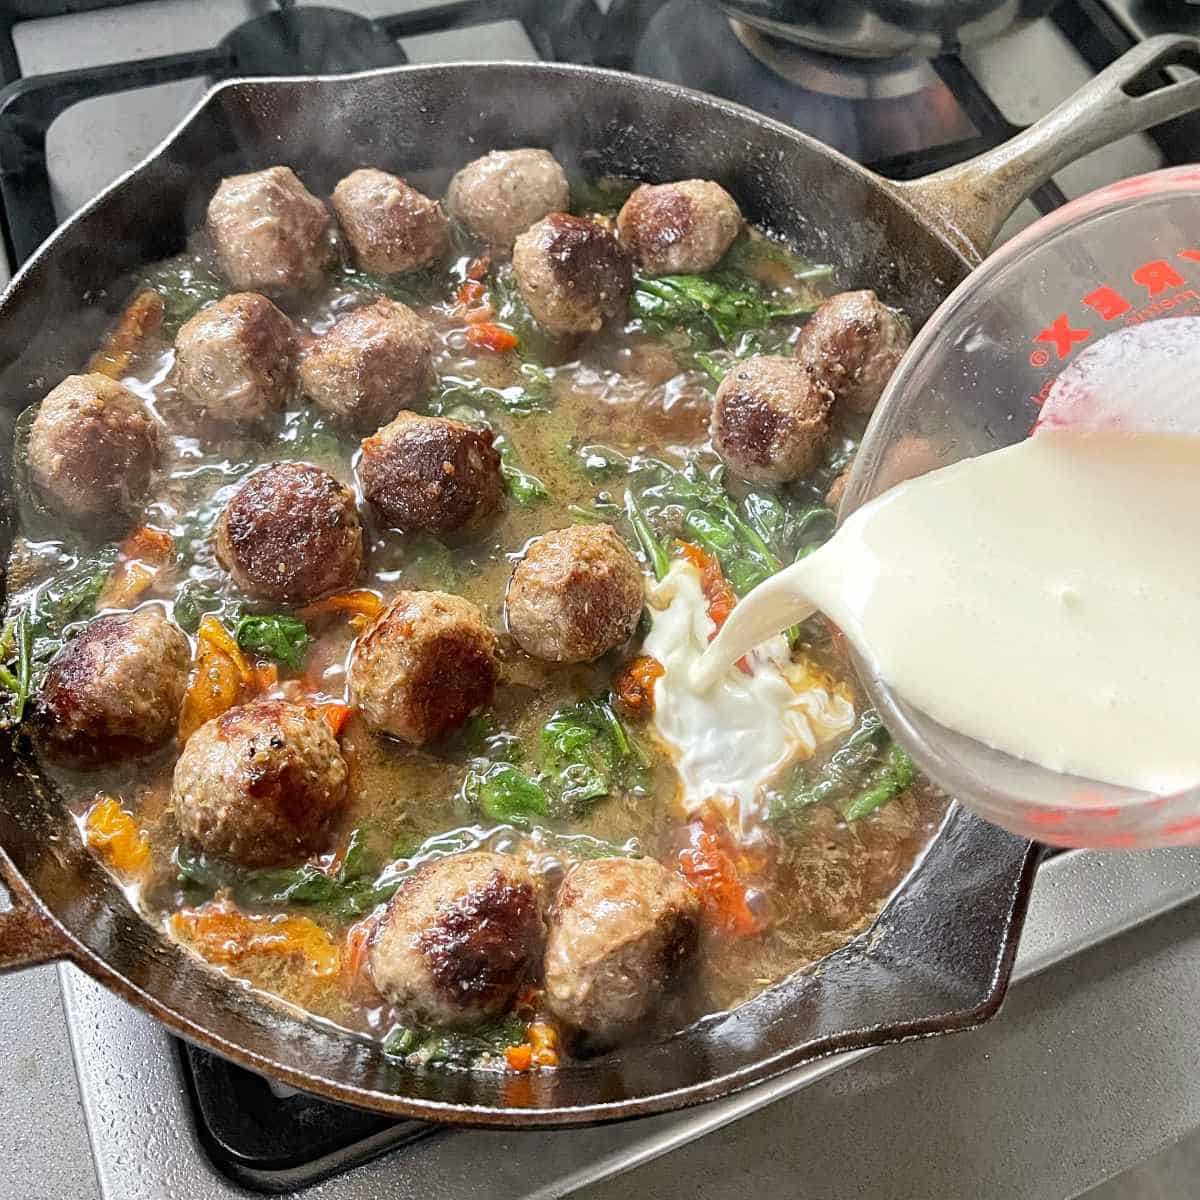 Tuscan meatballs simmering over a medium heat with cream being added from a small glass jug